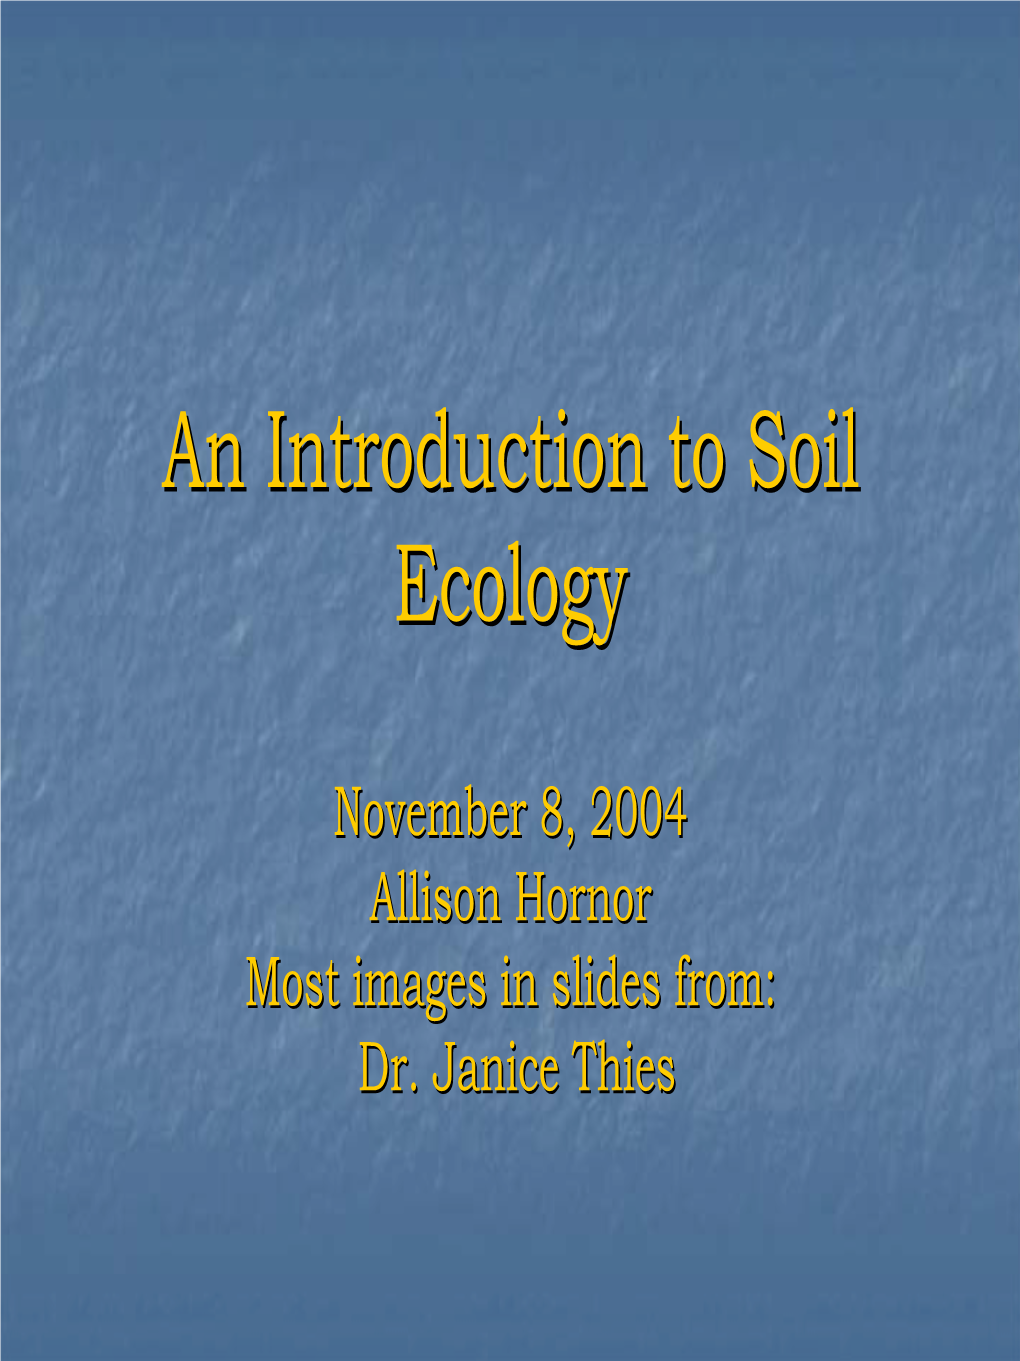 An Introduction to Soil Ecology